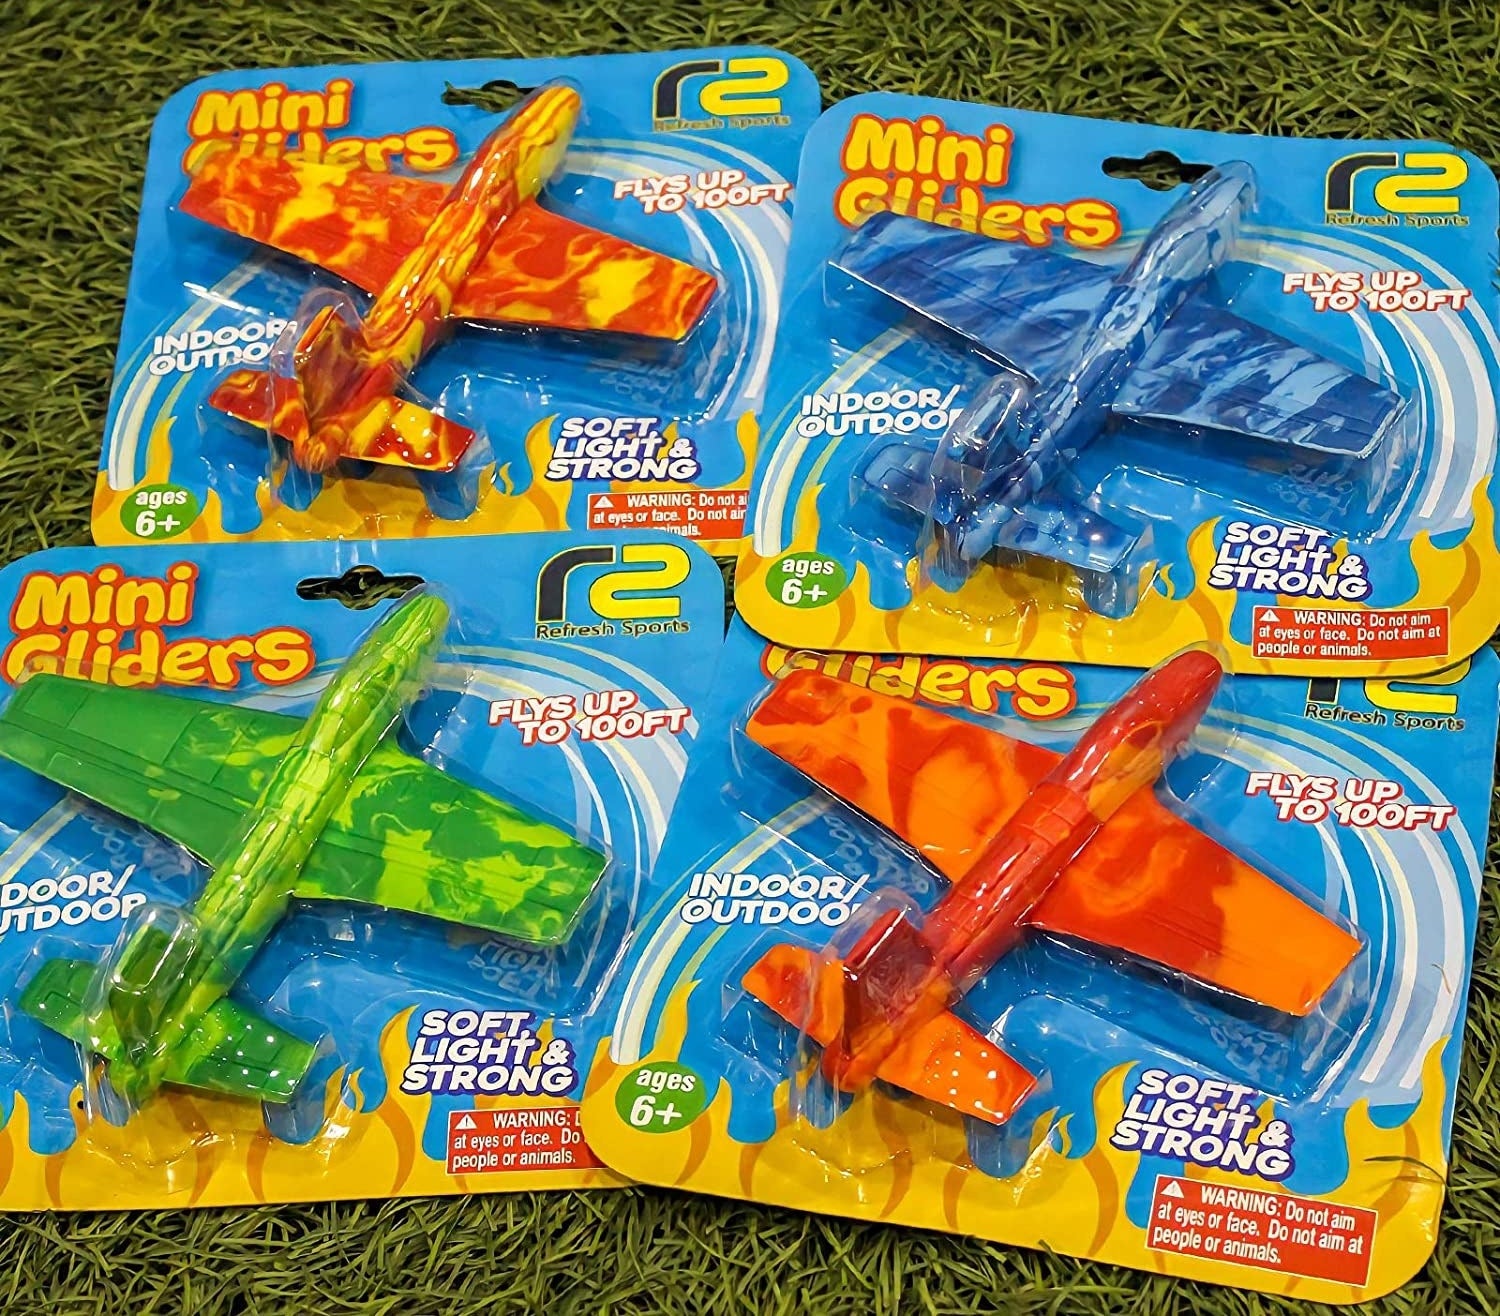 Four multicolored foam plane toys in their packaging